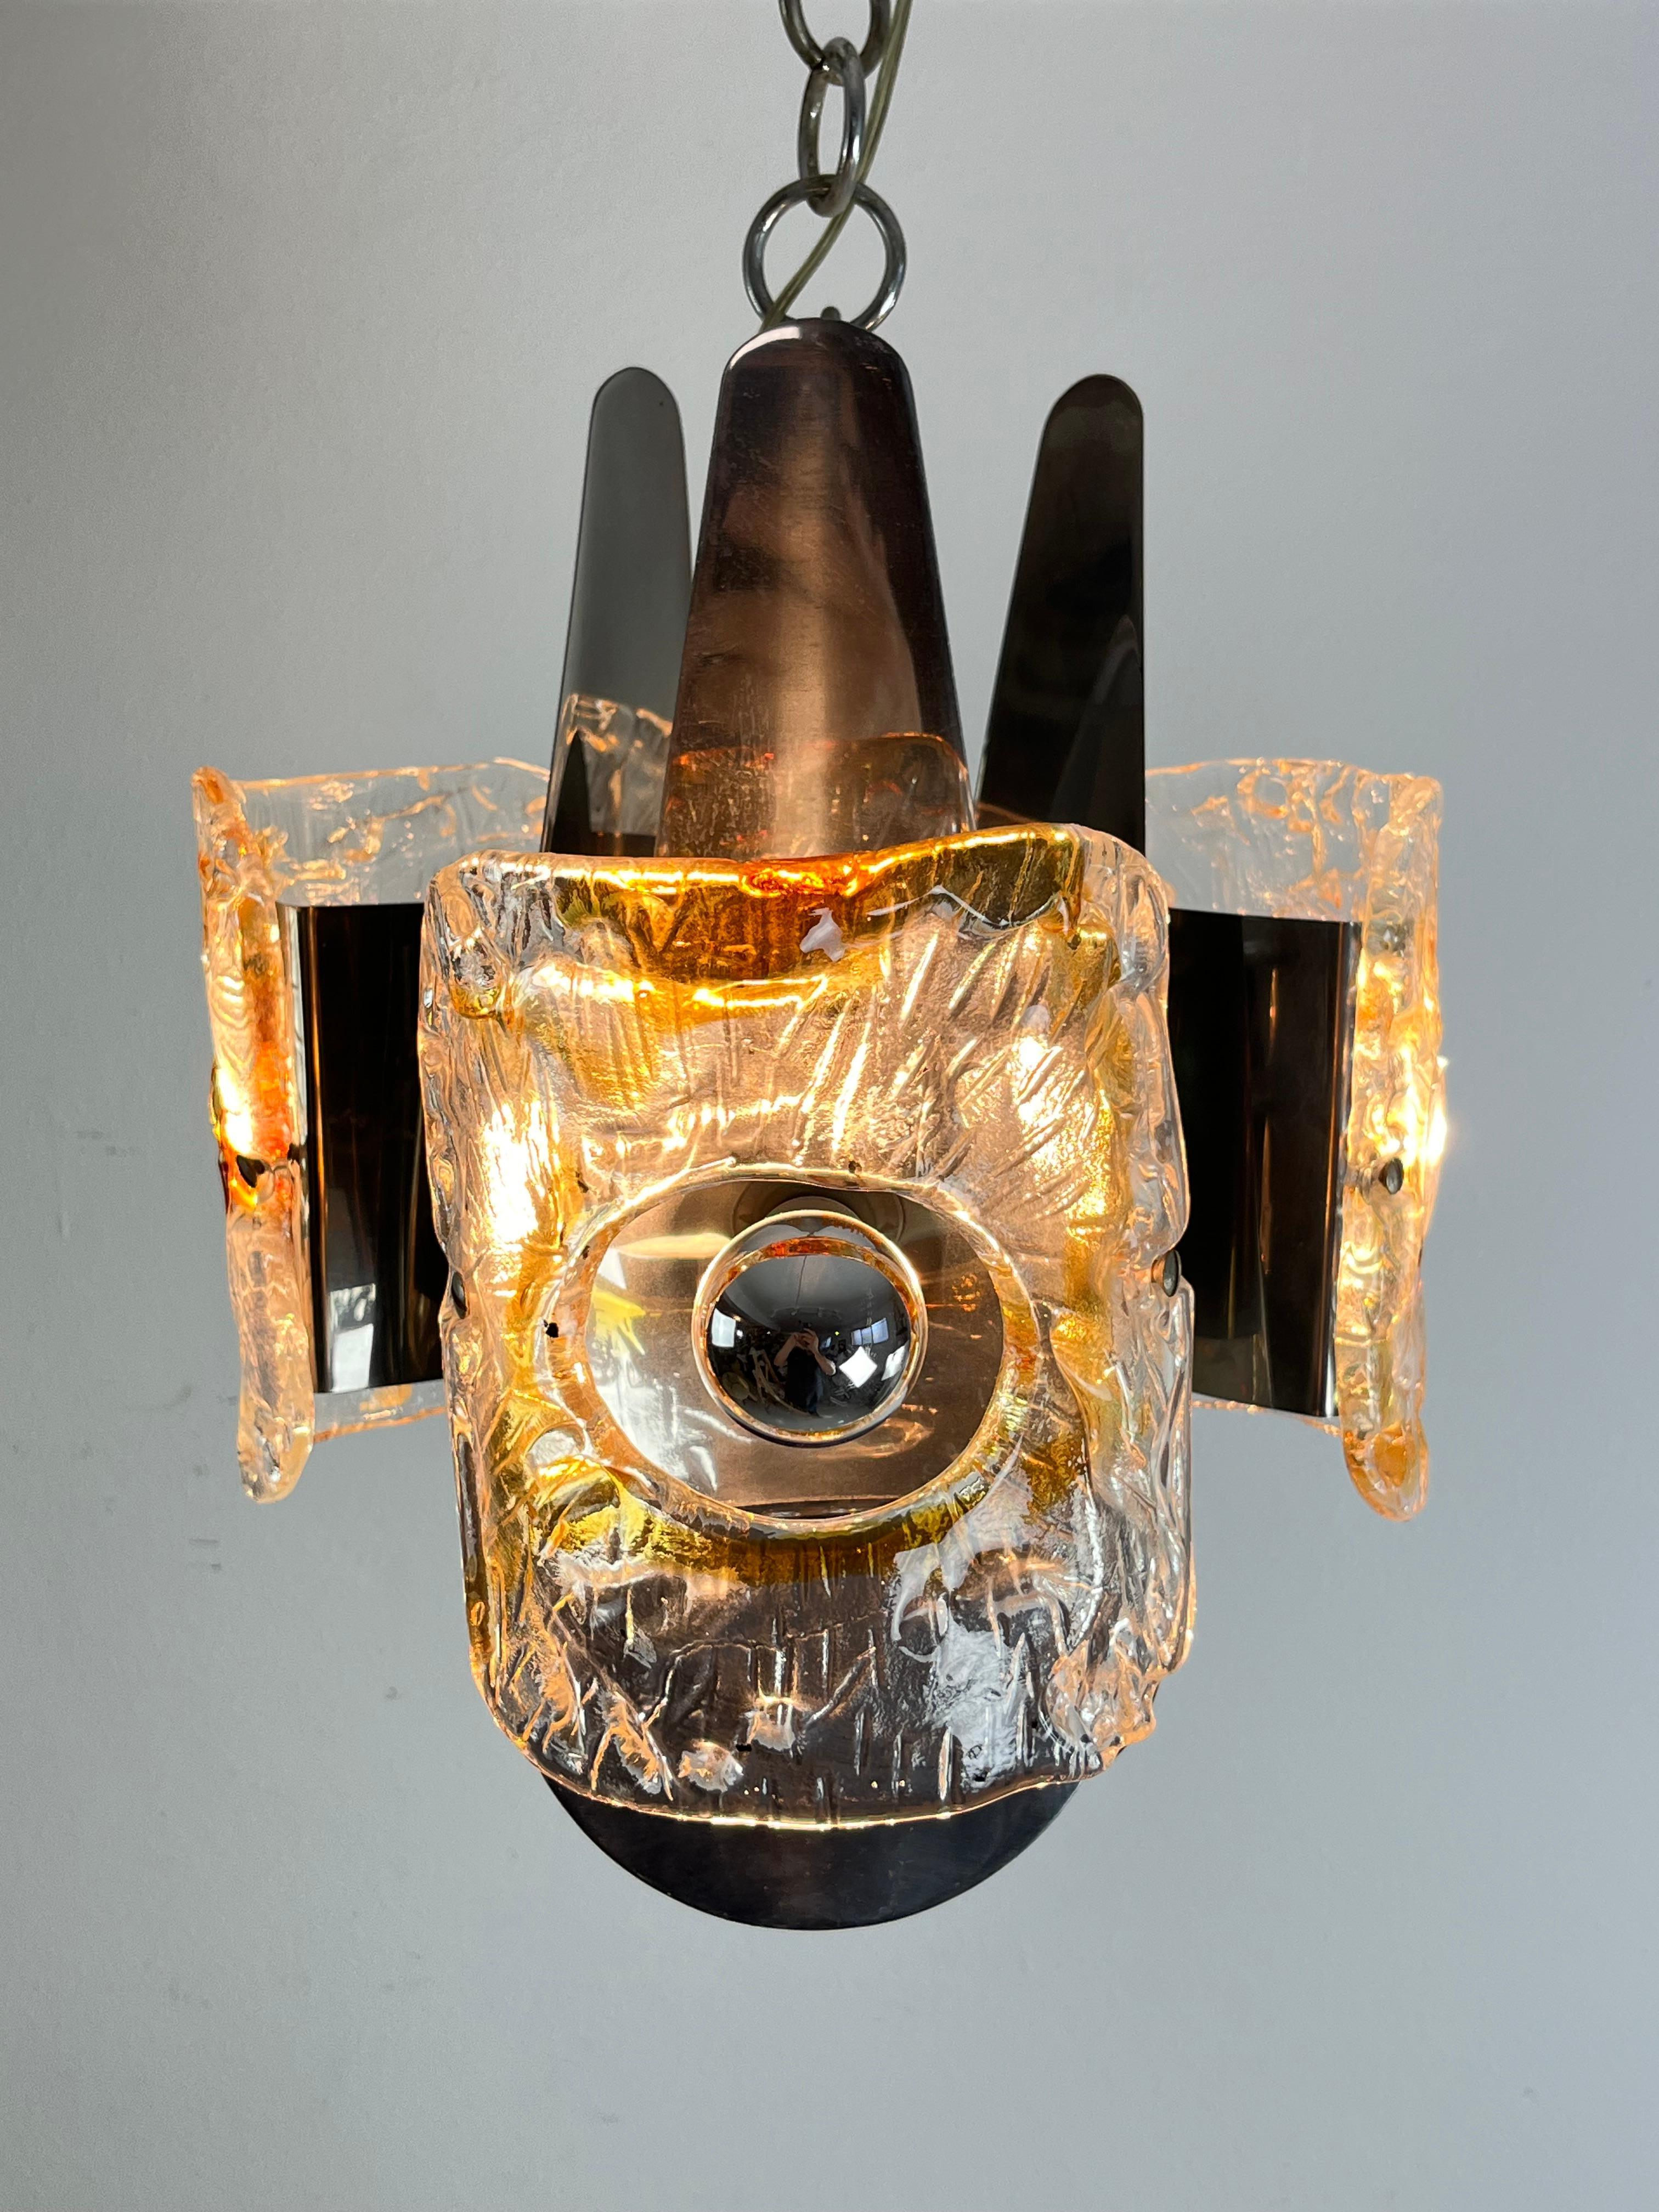 Steel Mid-Century Chandelier In Murano Glass Attributed to Toni Zuccheri for Mazzega For Sale